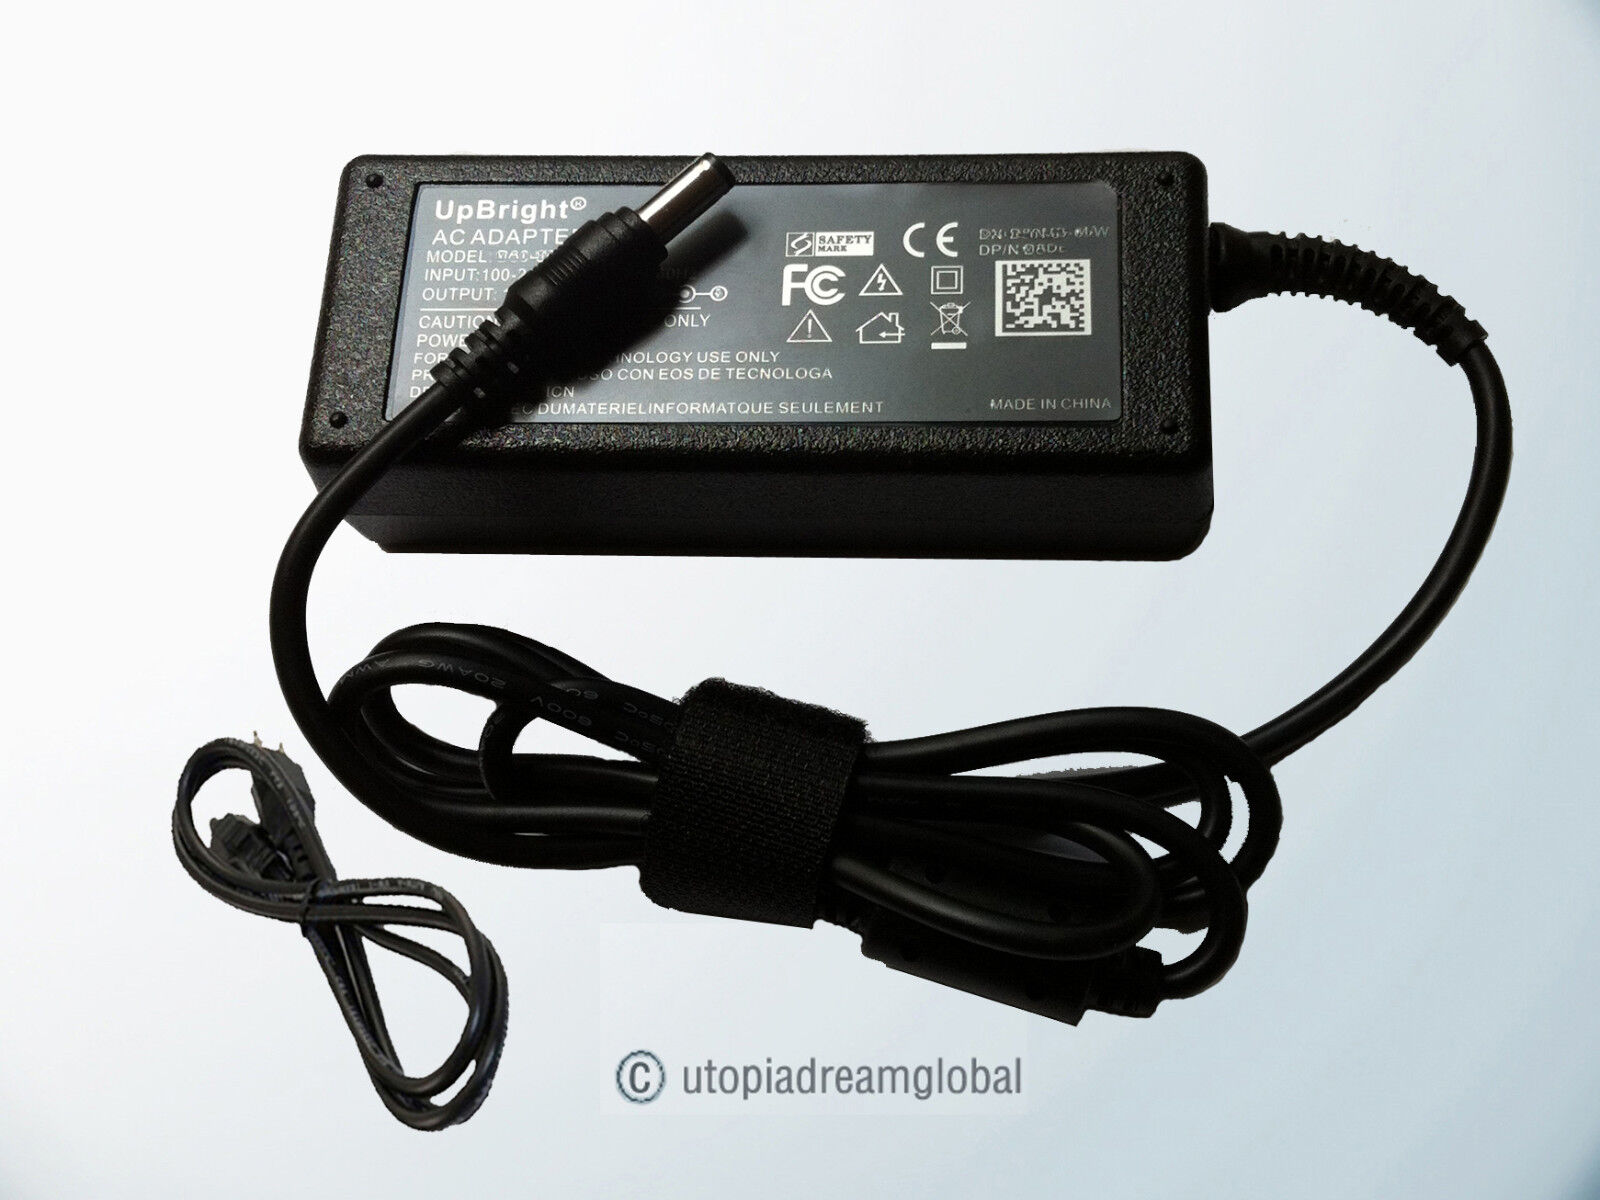 12V AC Adapter For Viewsonic VX900 VX800-2 LCD Monitor Power Supply Cord Charger